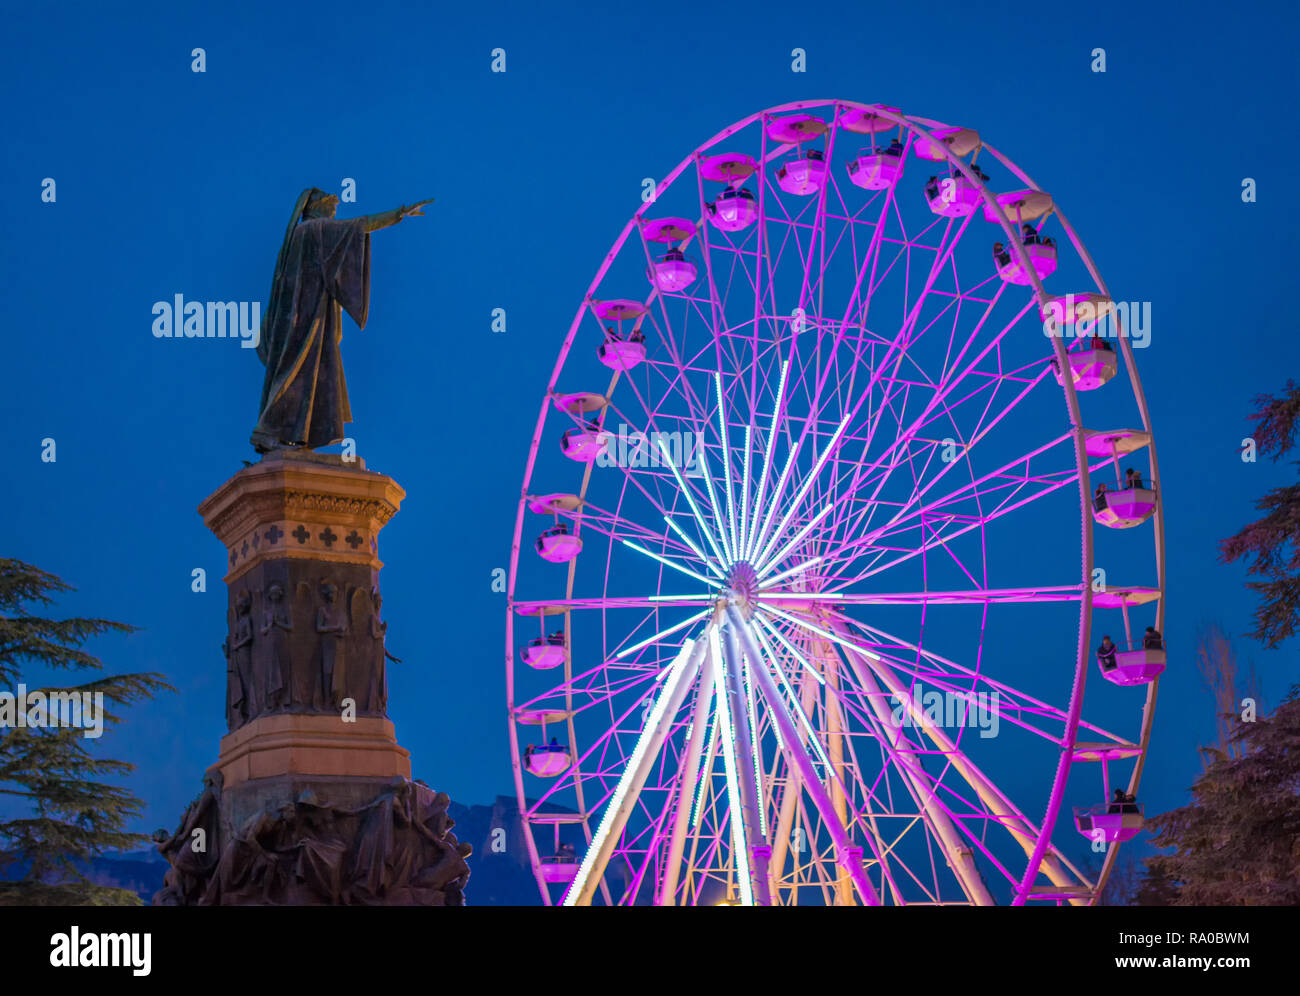 The big panoramic wheel in Dante Alighieri square in Trento city at night during the Christmas festivity. Christmas market in Trento, Trentino Alto Ad Stock Photo